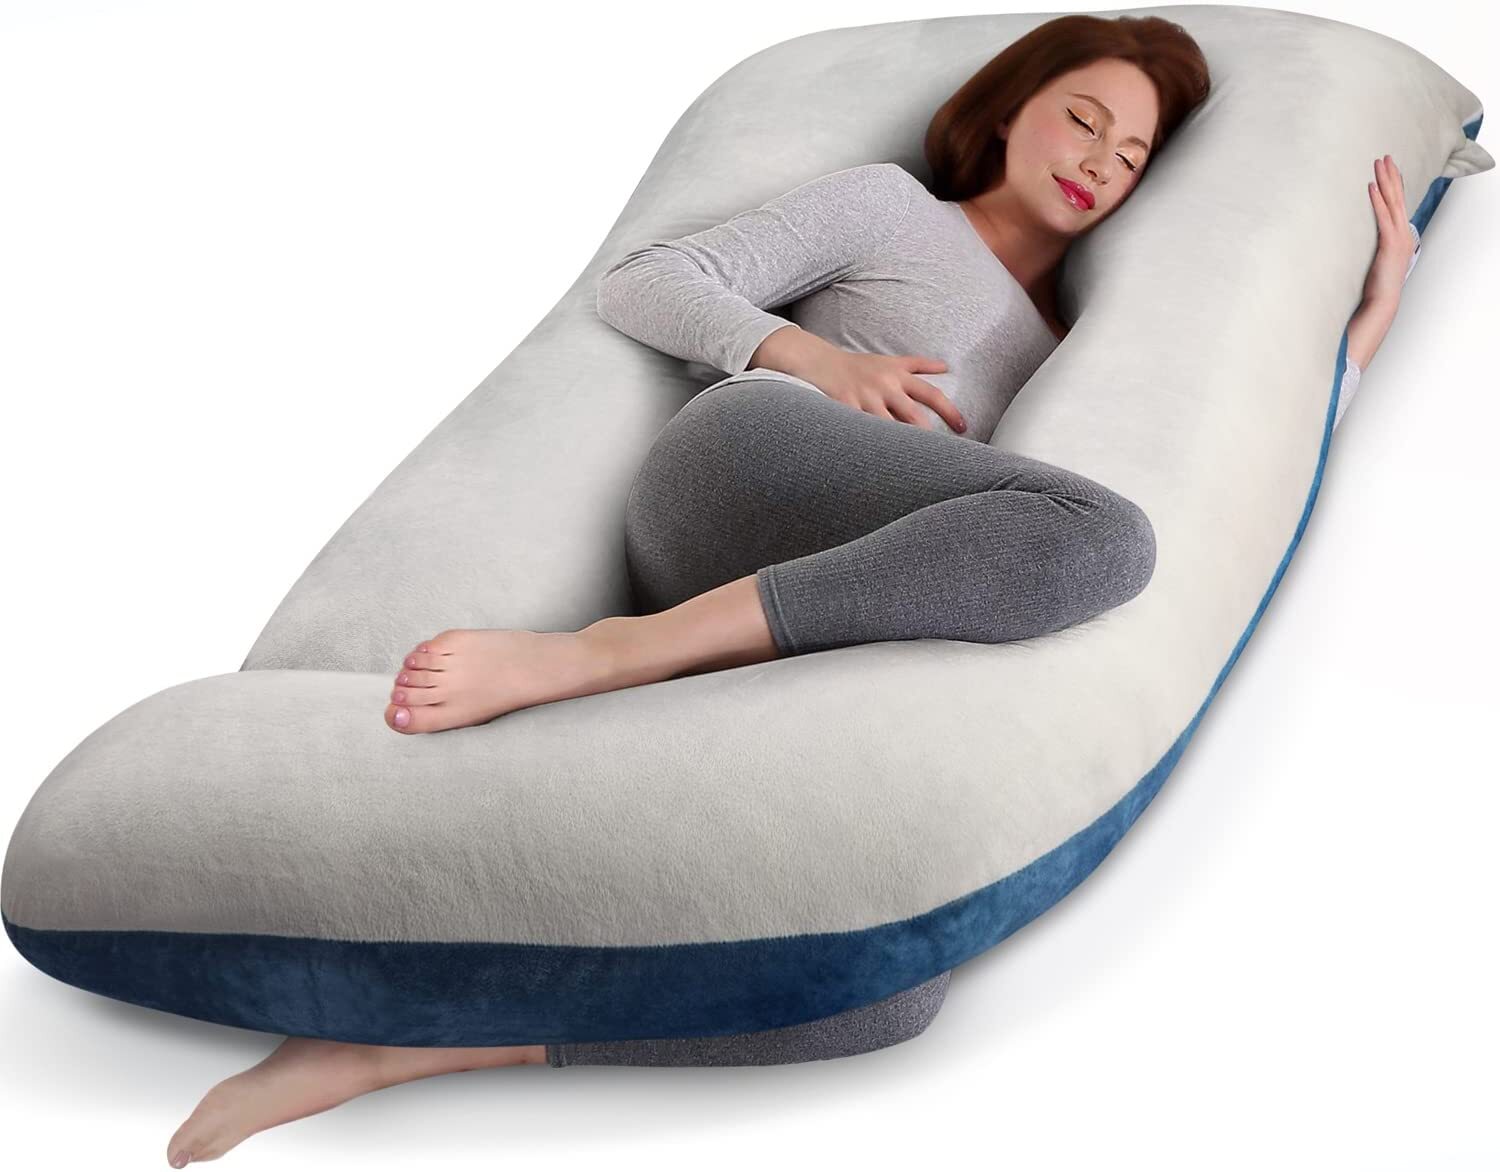 AngQi Pregnancy Pillows, U Shaped Pregnancy Body Pillow for Sleeping, 55  inch Maternity Pillow for Pregnant Women with Cooling Jersey Cover, Grey